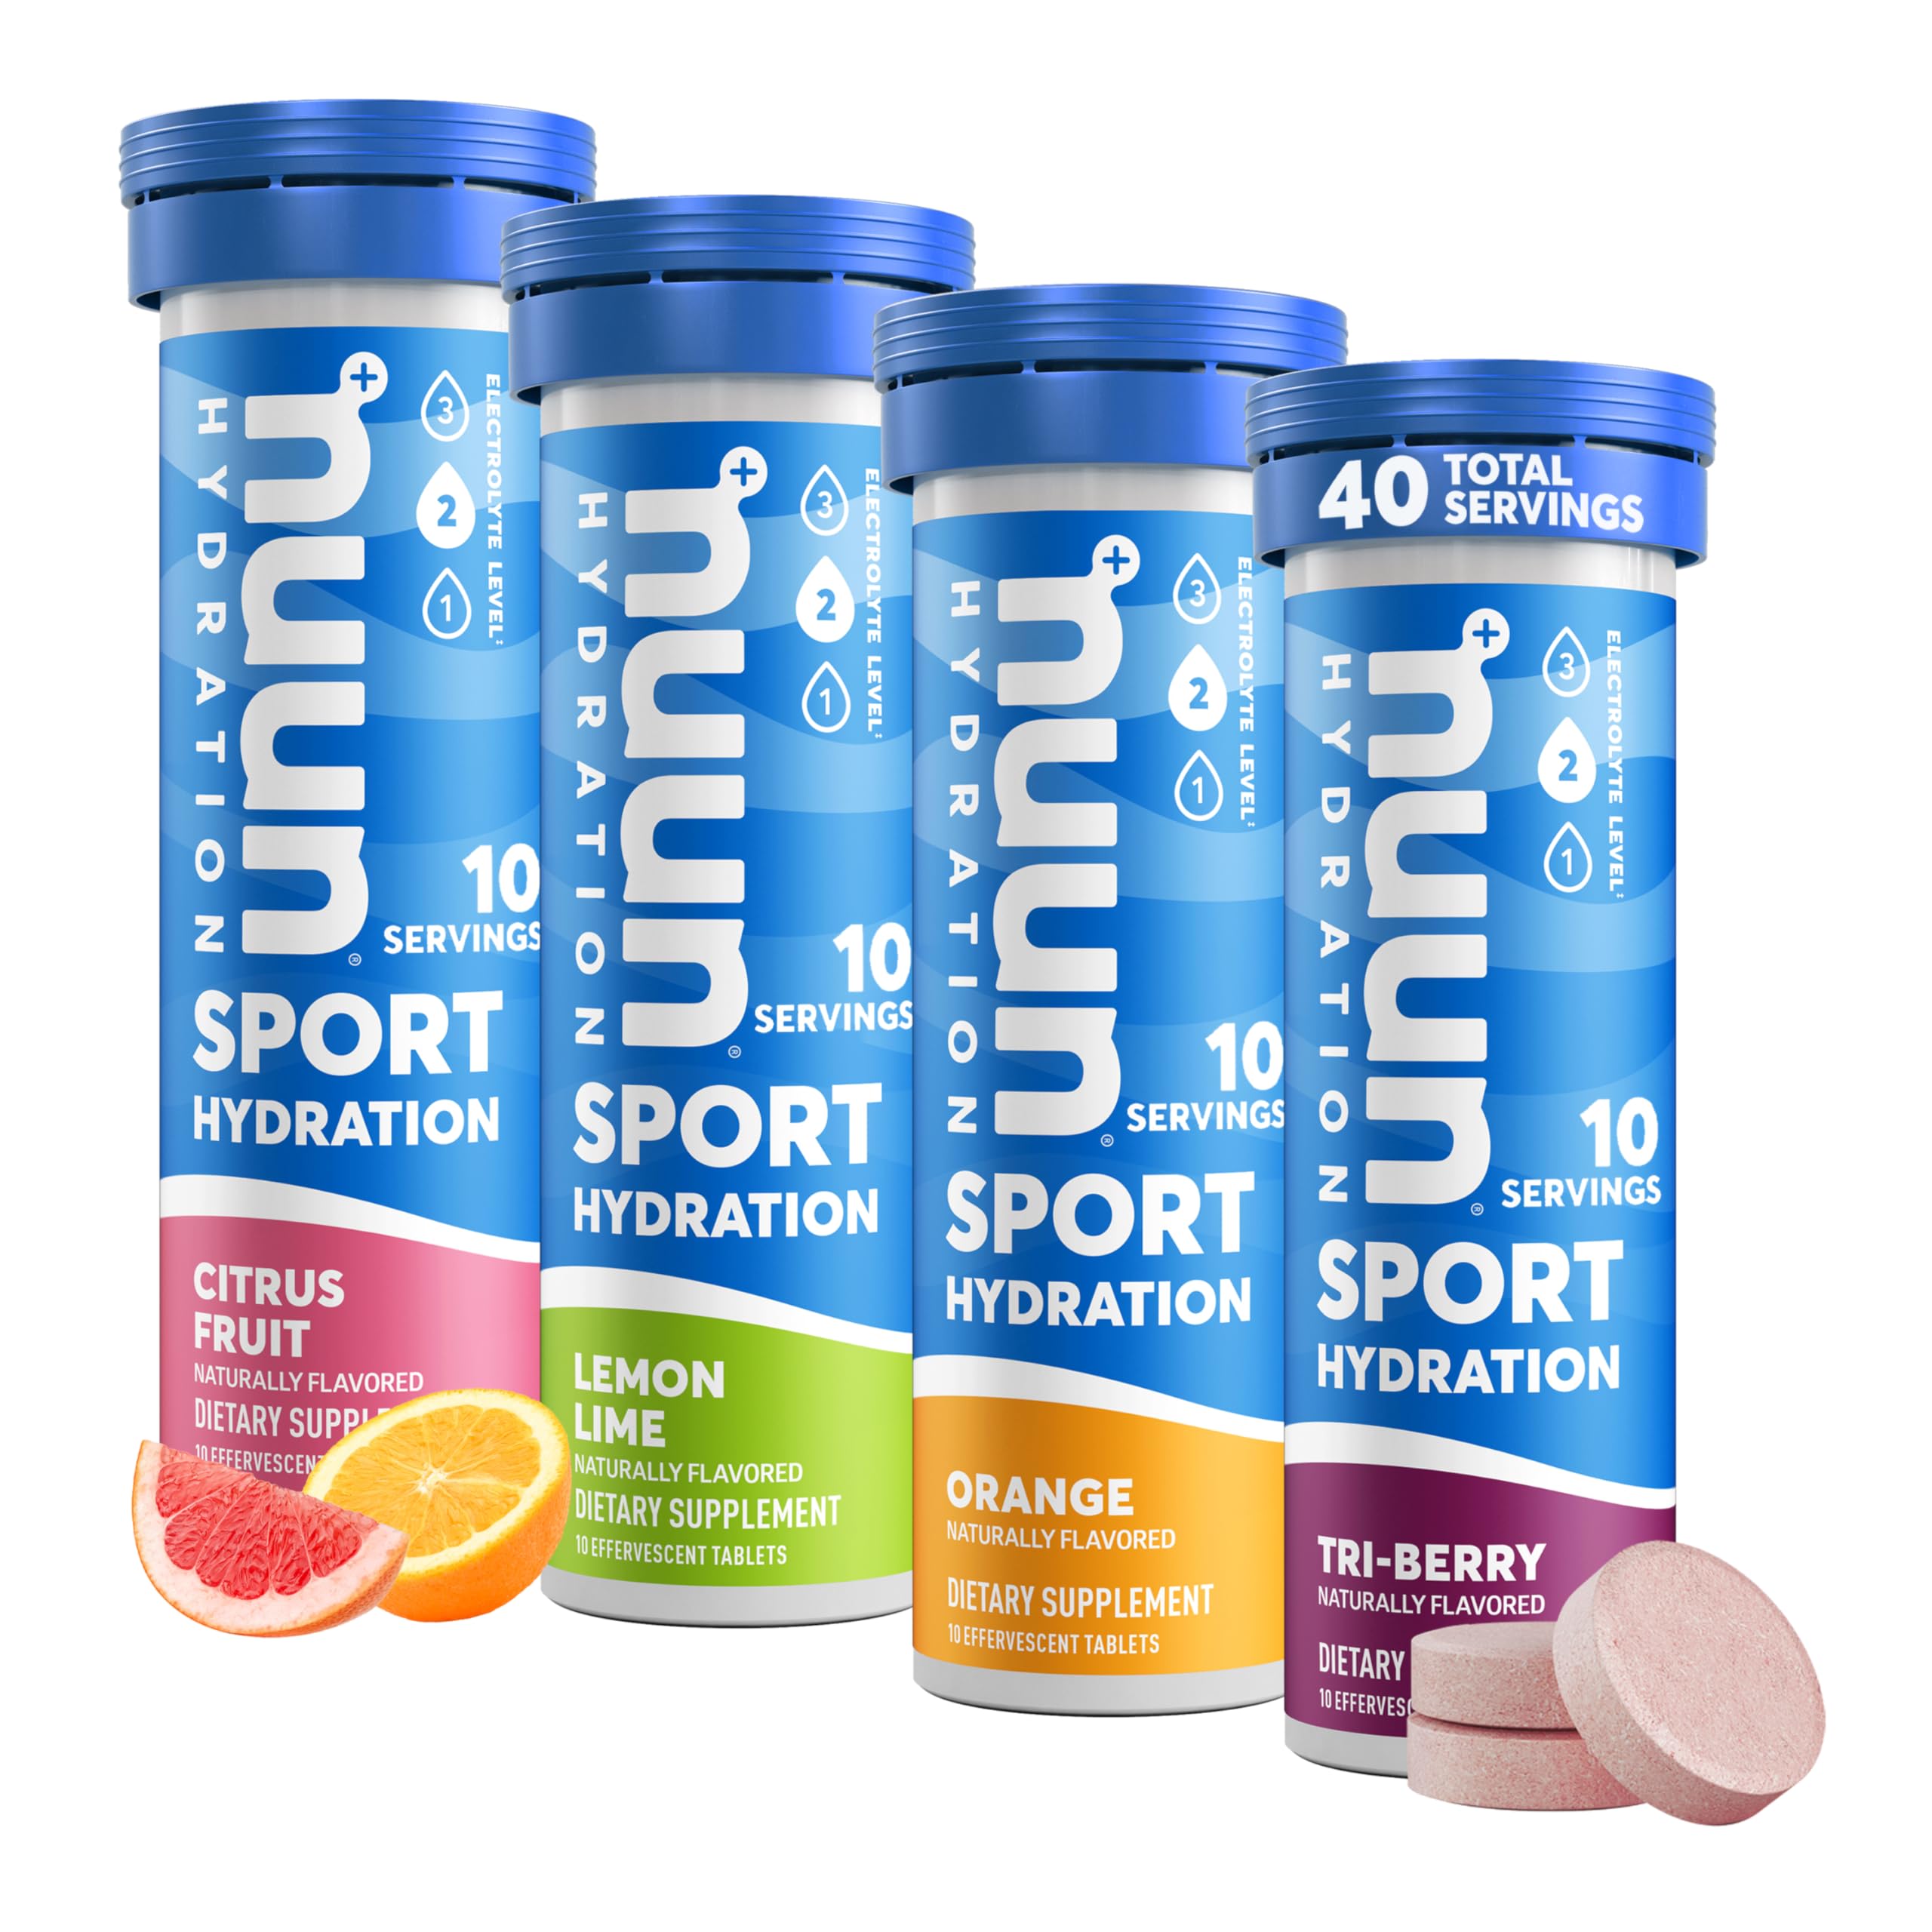 GU Energy Original Sports Nutrition Energy Gel, 24-Count, Assorted Fruity Flavors & Nuun Sport Electrolyte Tablets for Proactive Hydration, Mixed Citrus Berry Flavors, 4 Pack (40 Servings)